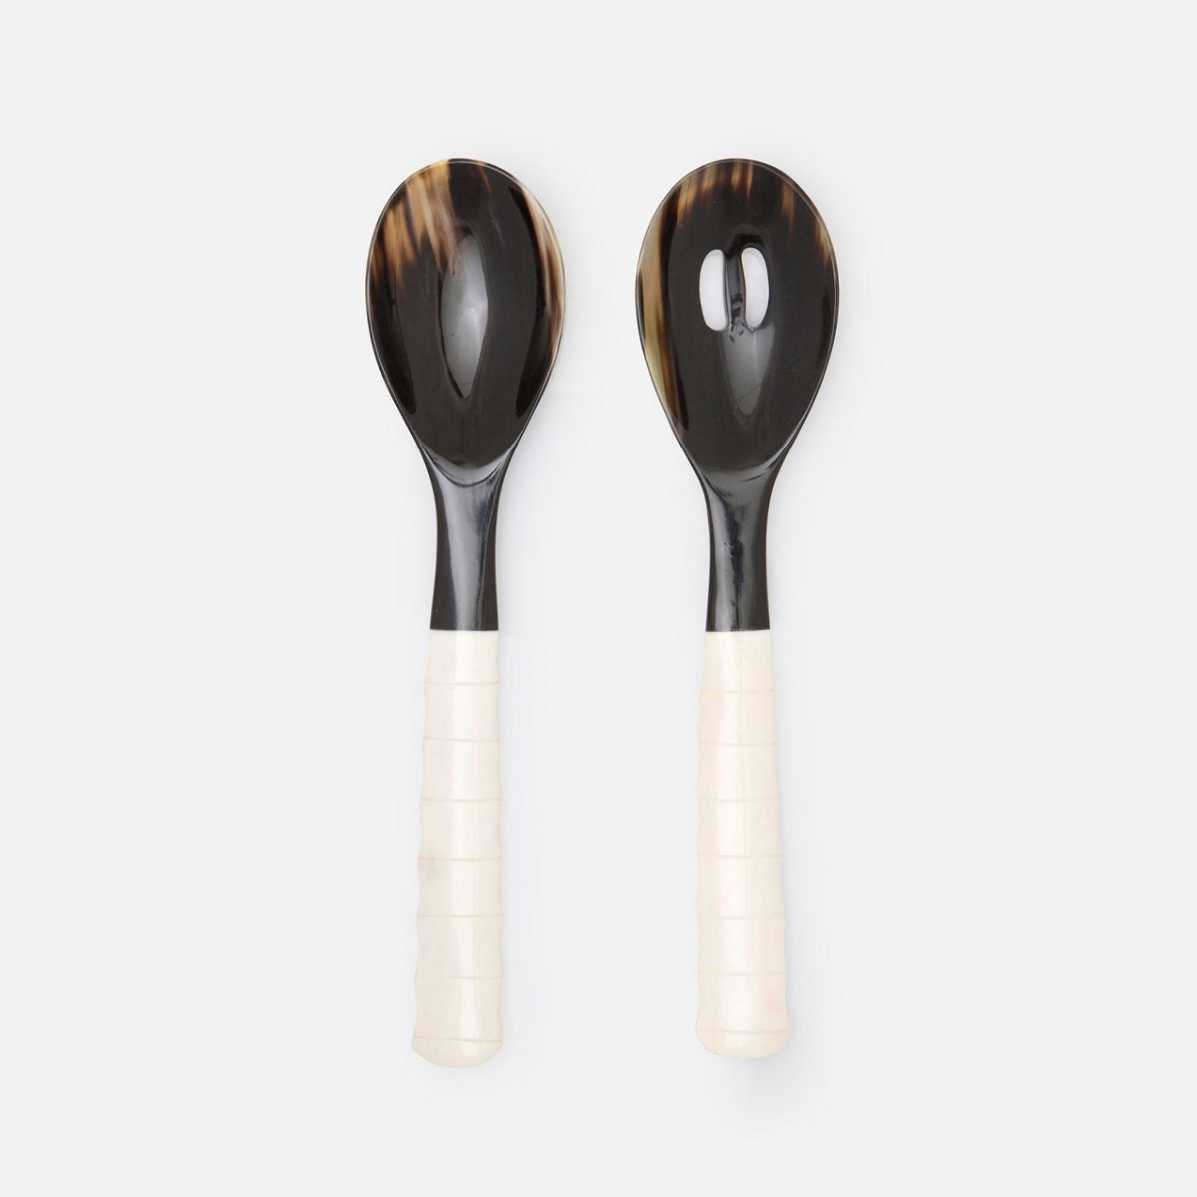 Serving Set in Horn and Bone